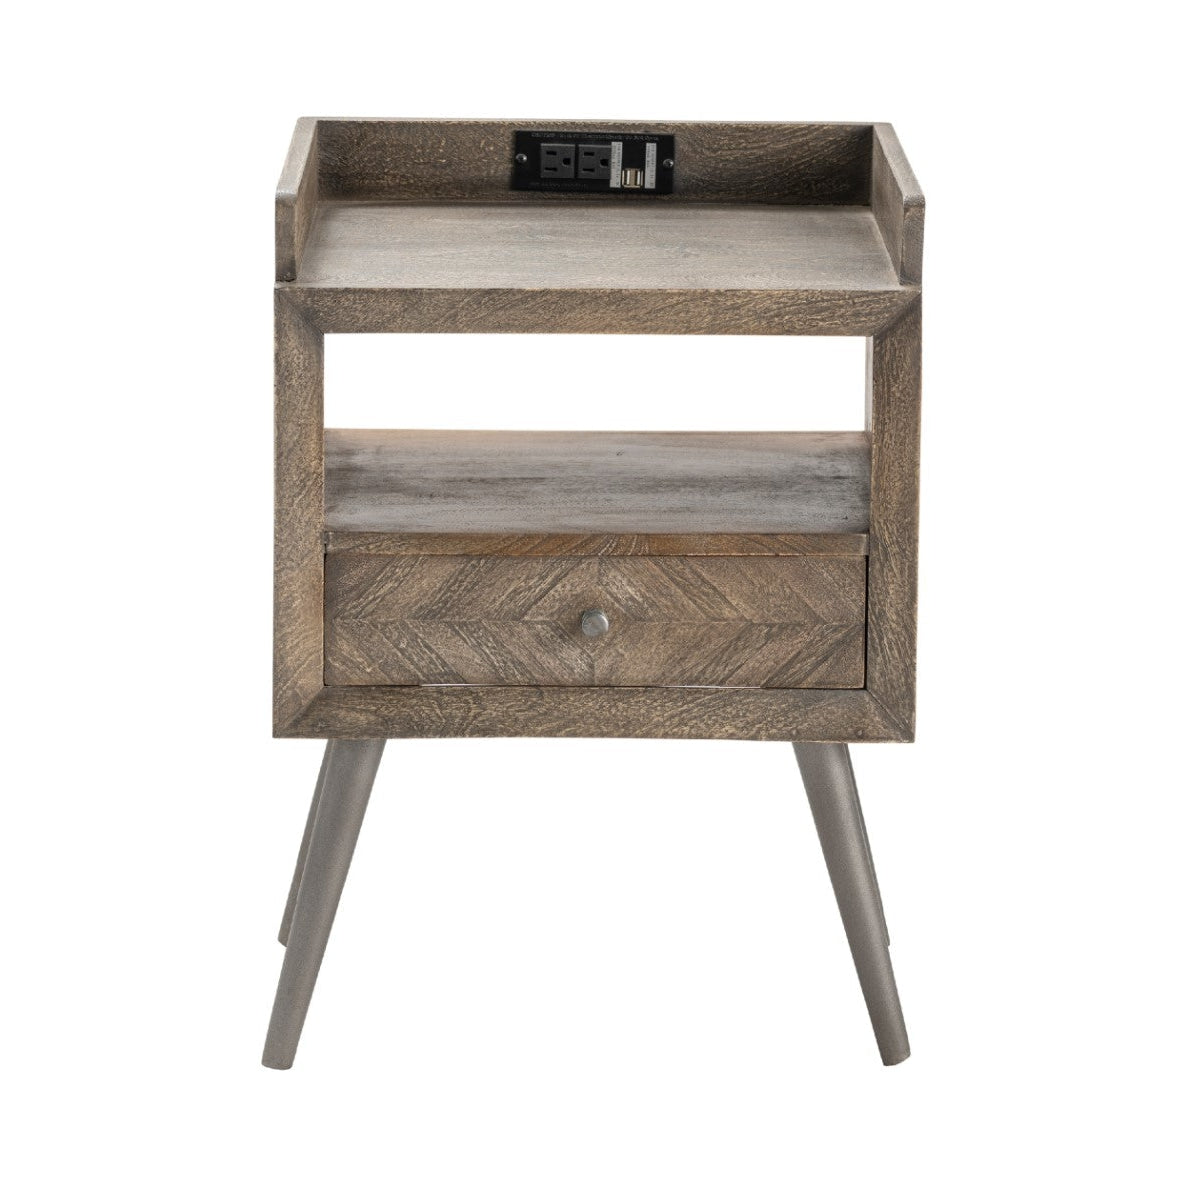 Crestview Collection Freeport 18" x 15" x 25" 1-Drawer Rustic Metal And Wood Accent Table In Brown and Gray Finish